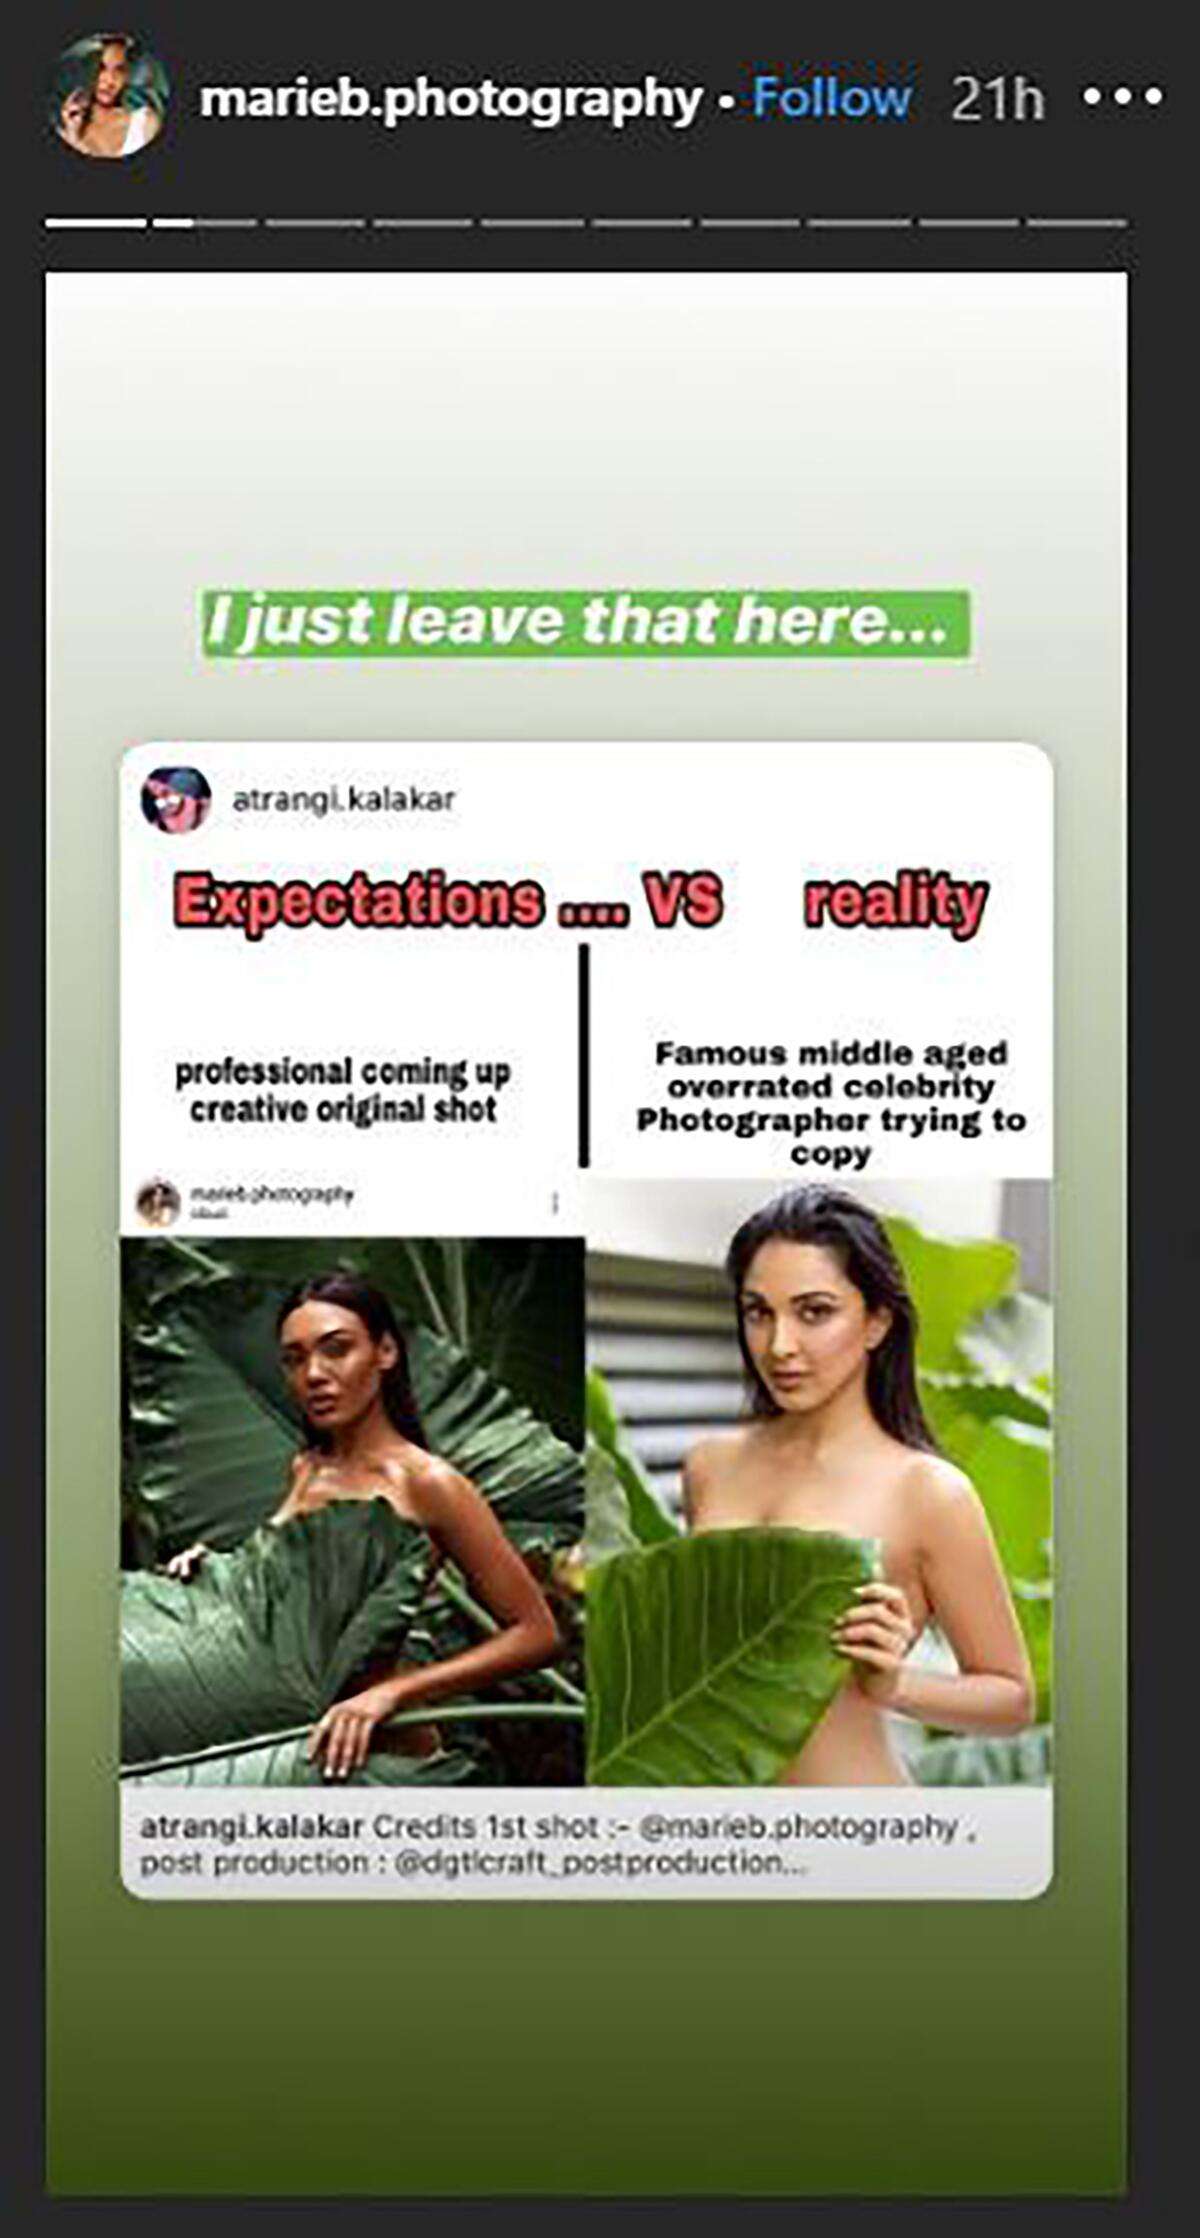 Kiara Advani says 'eww' to creepy comment about her leaf photoshoot. Watch